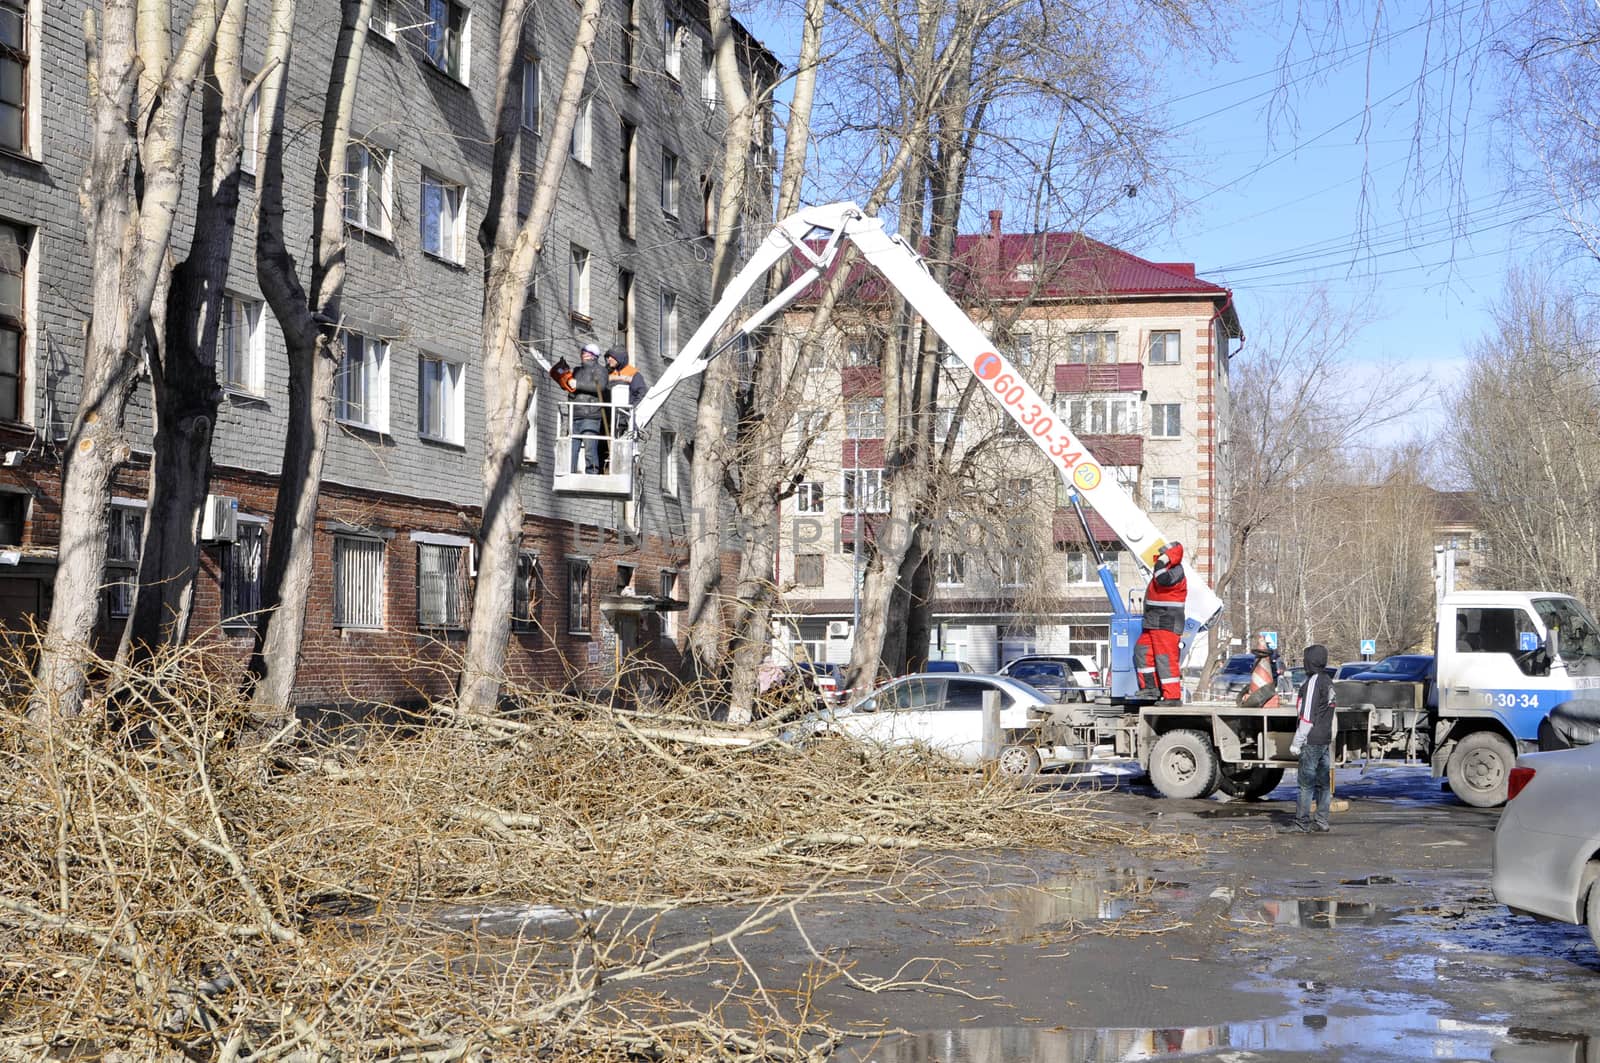 Spring cutting of trees in the city. Tyumen. by veronka72